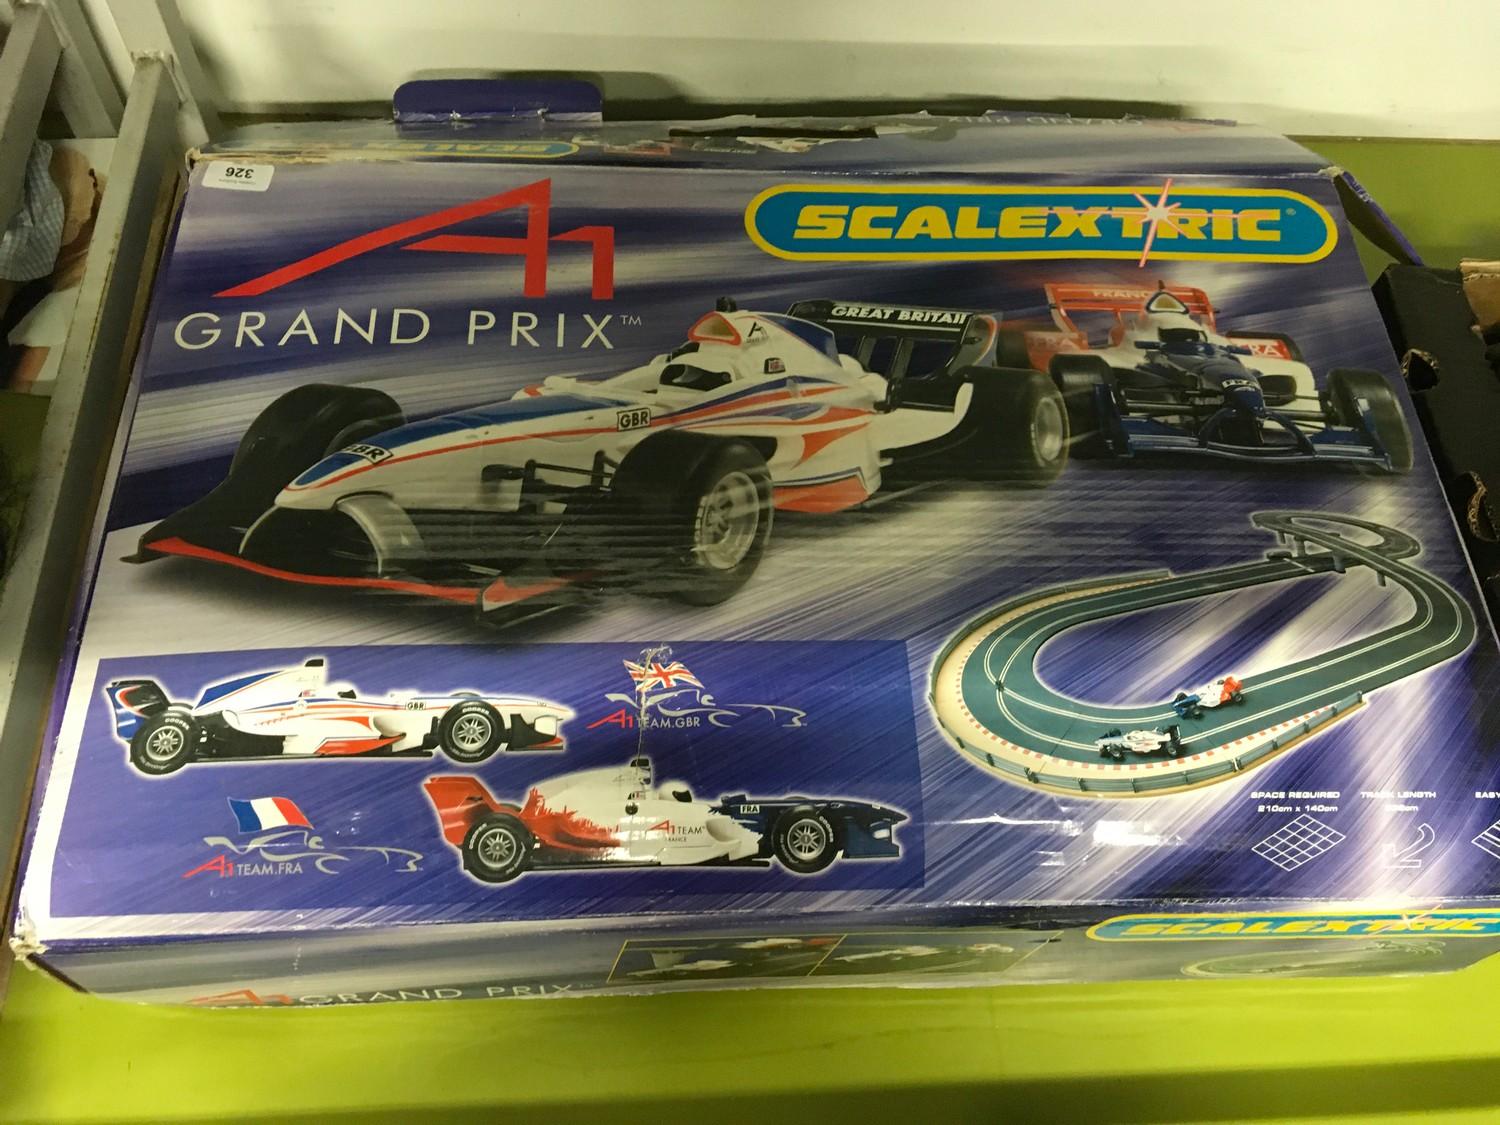 Scalextric Grand Prix racing set - not checked for completeness.